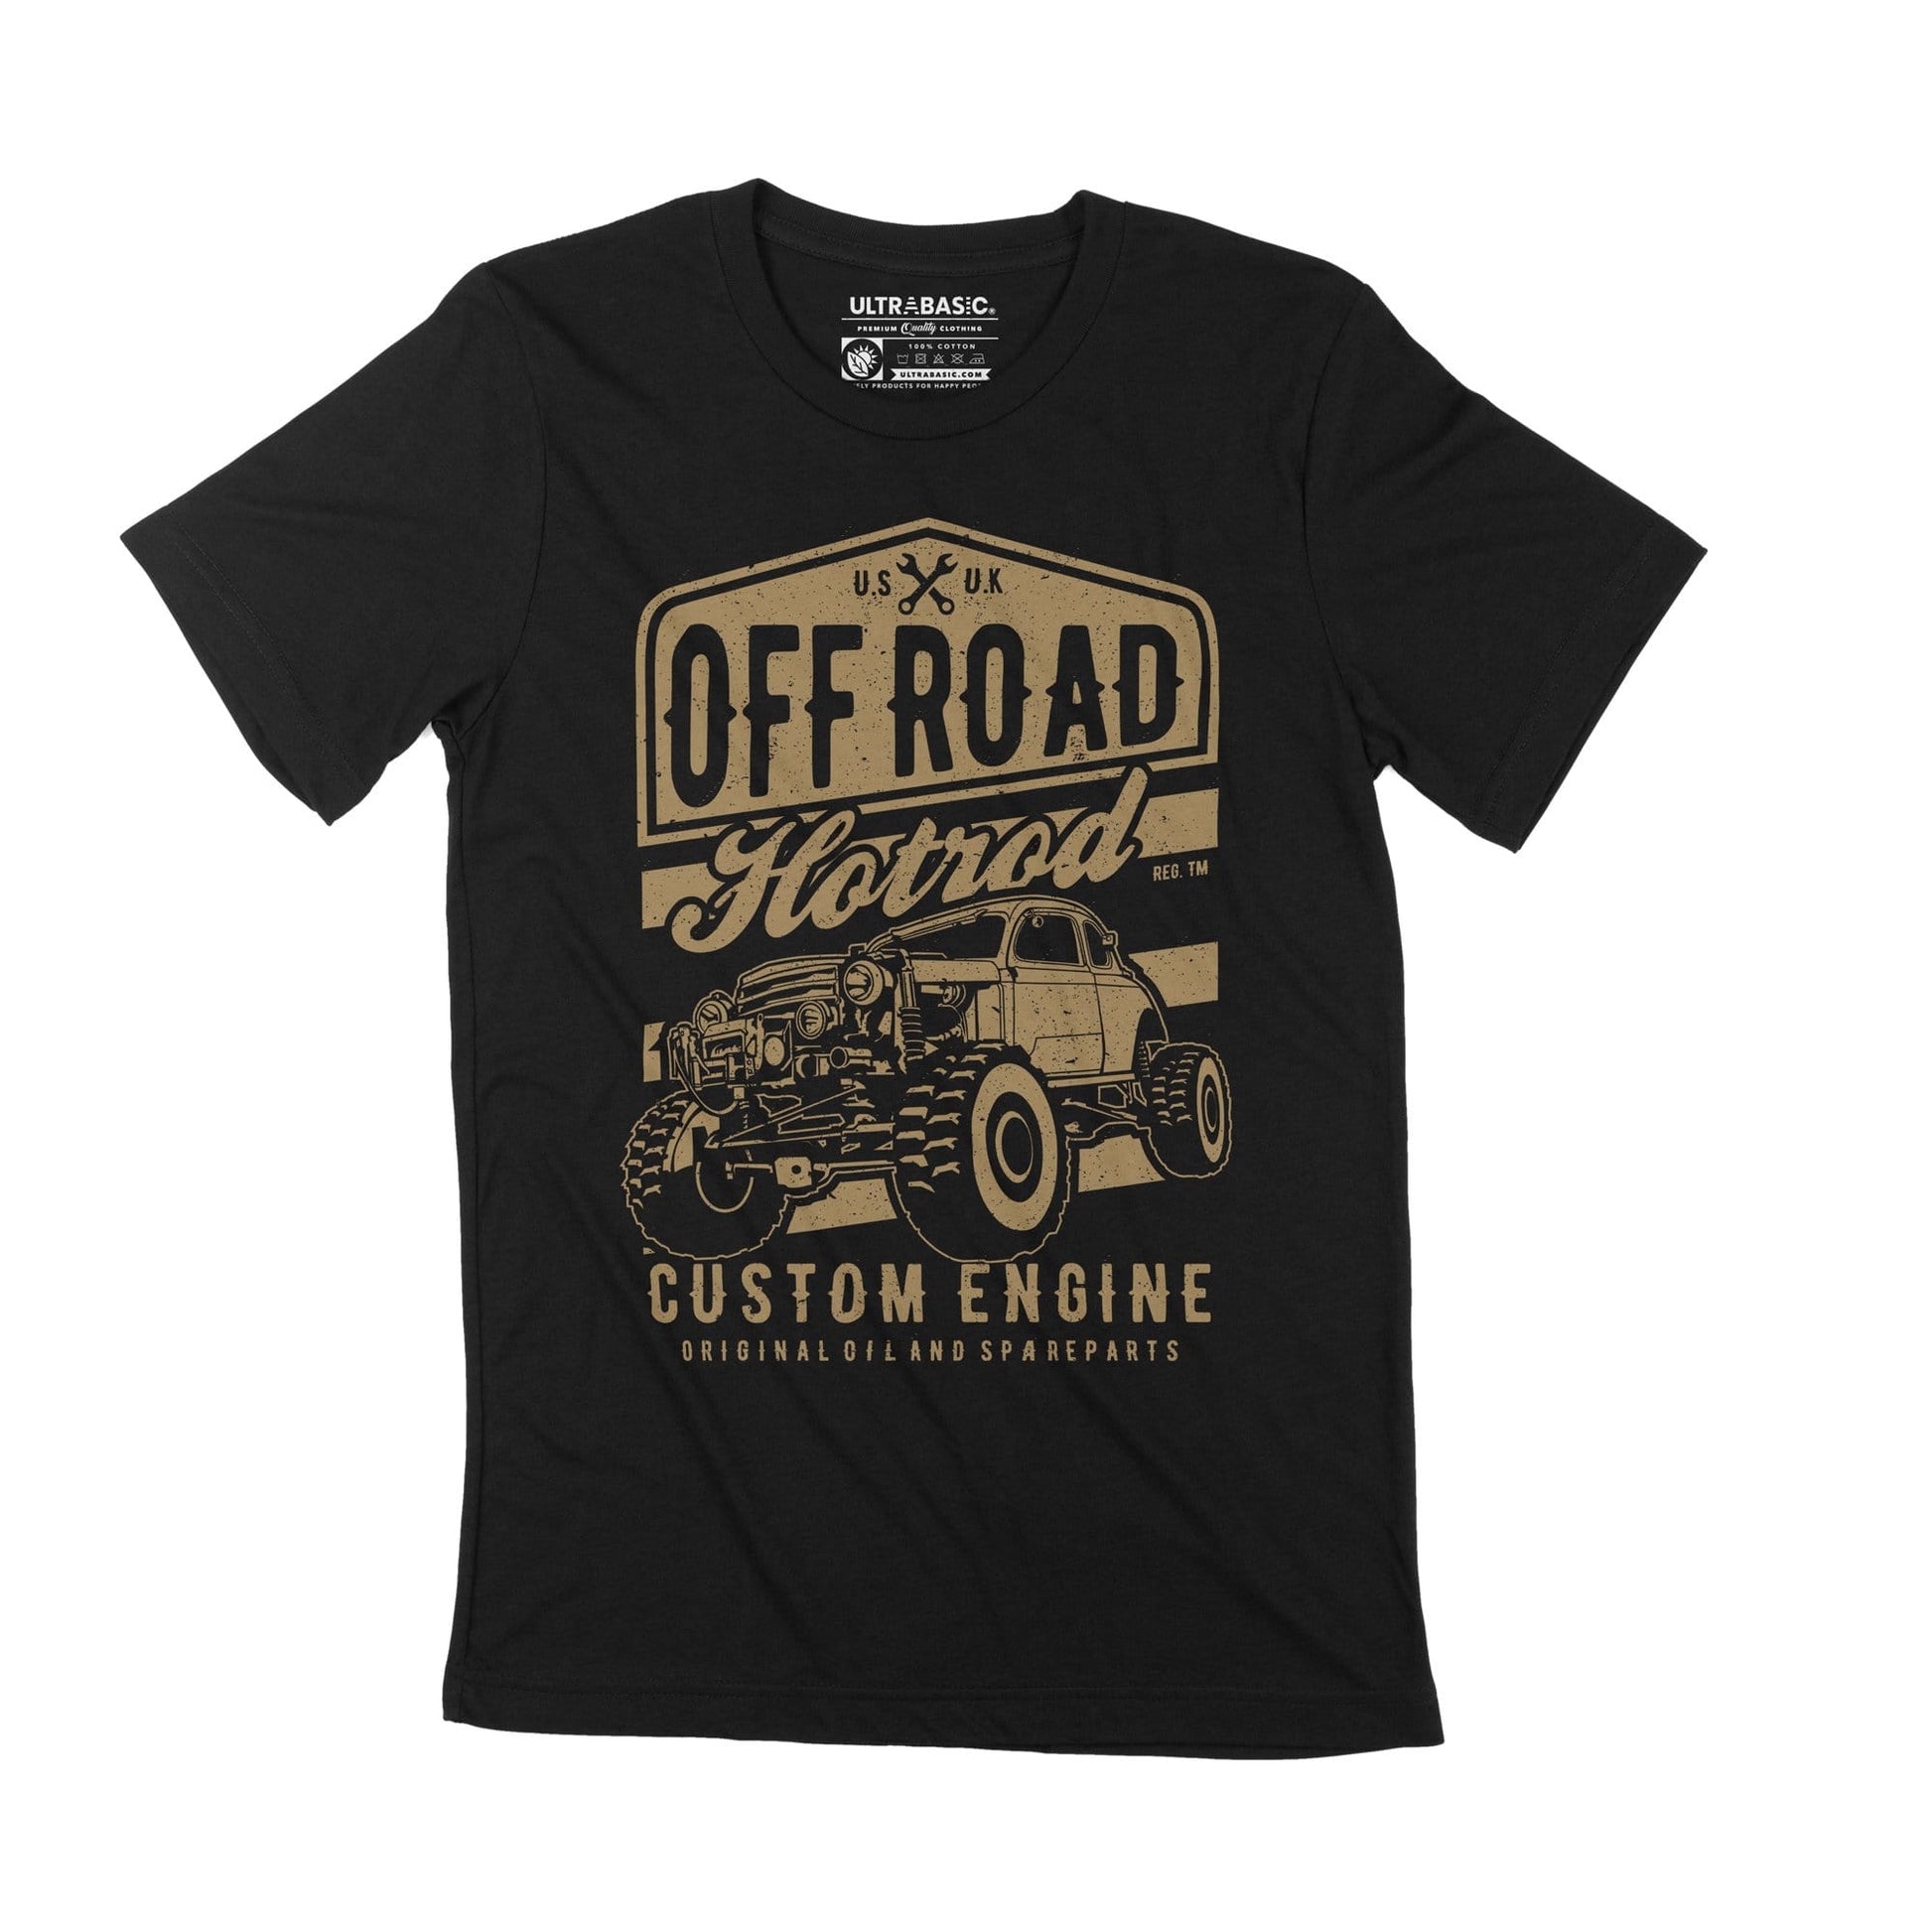 ULTRABASIC Men's Vintage T-Shirt Offroad Hotrod - Custom Engine - Birthday Gift driver trucker truck novelty shirts traditional apparel classics grandpa street rod gifts women car clothing merchandise clothes slogan movie team casual outdoor mehanic america usa guy road unisex racer dad fast national association gas christmas 